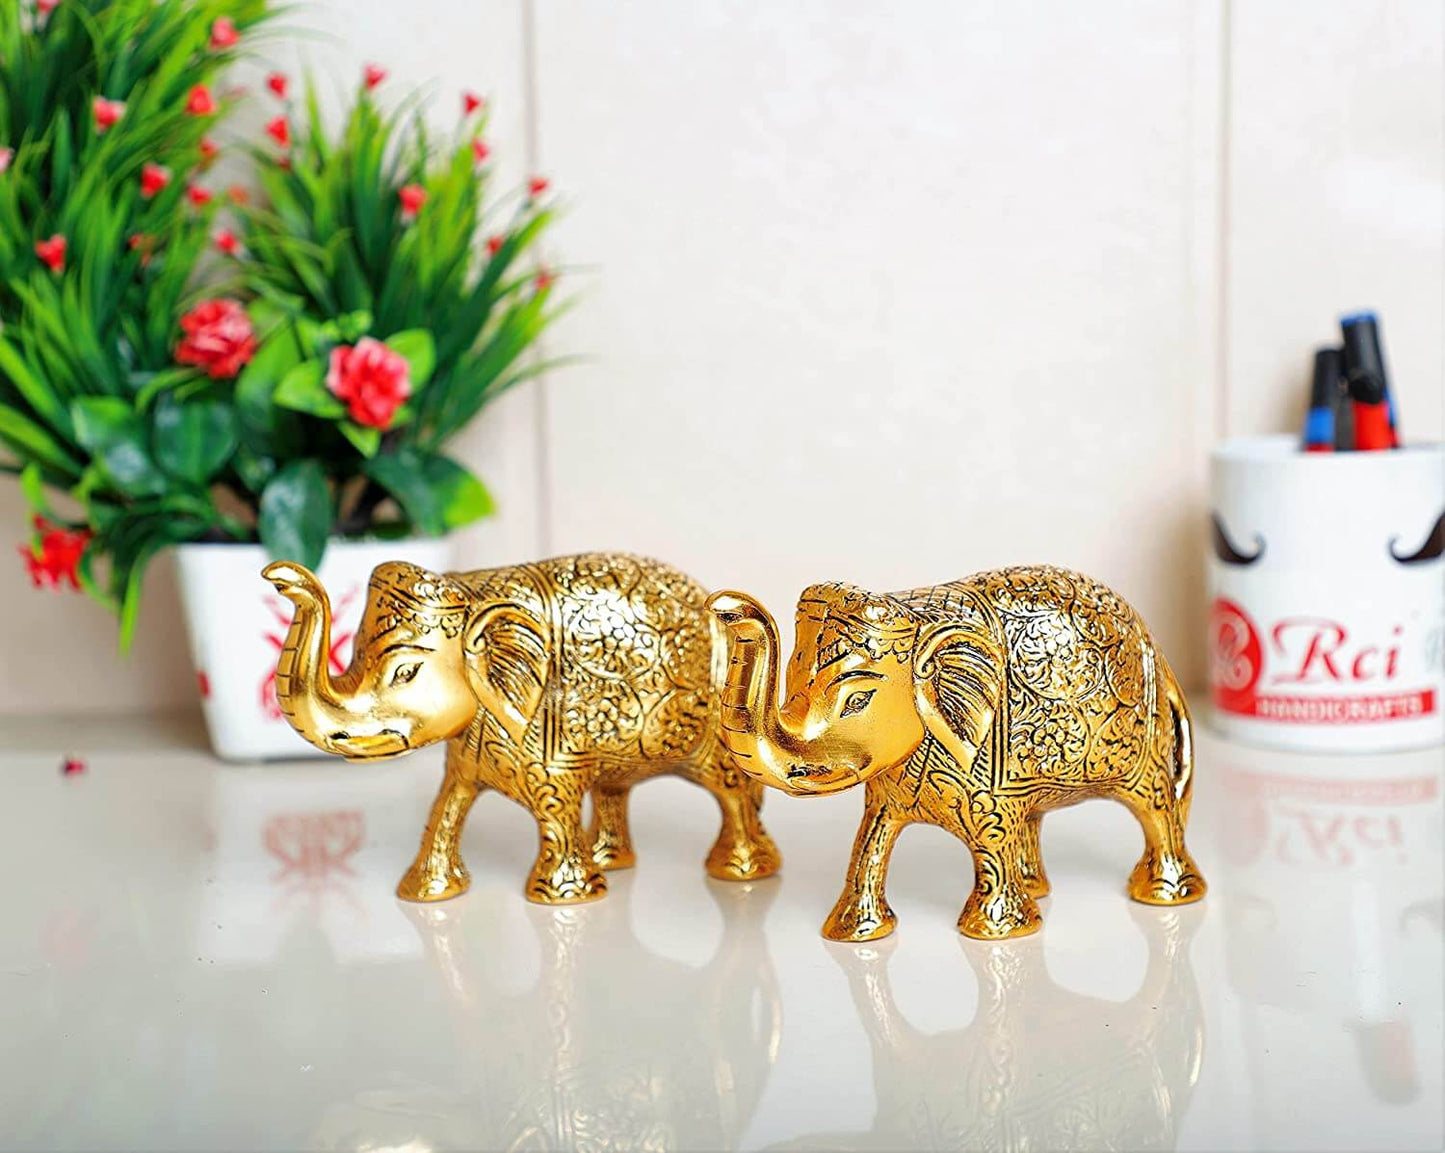 Metal Elephant Statue Small Size Gold Polish 2 pcs Set for Your Home, Office Table Decorative & Gift Article, Animal Showpiece Figurines. Mangal Fashions | Indian Home Decor and Craft